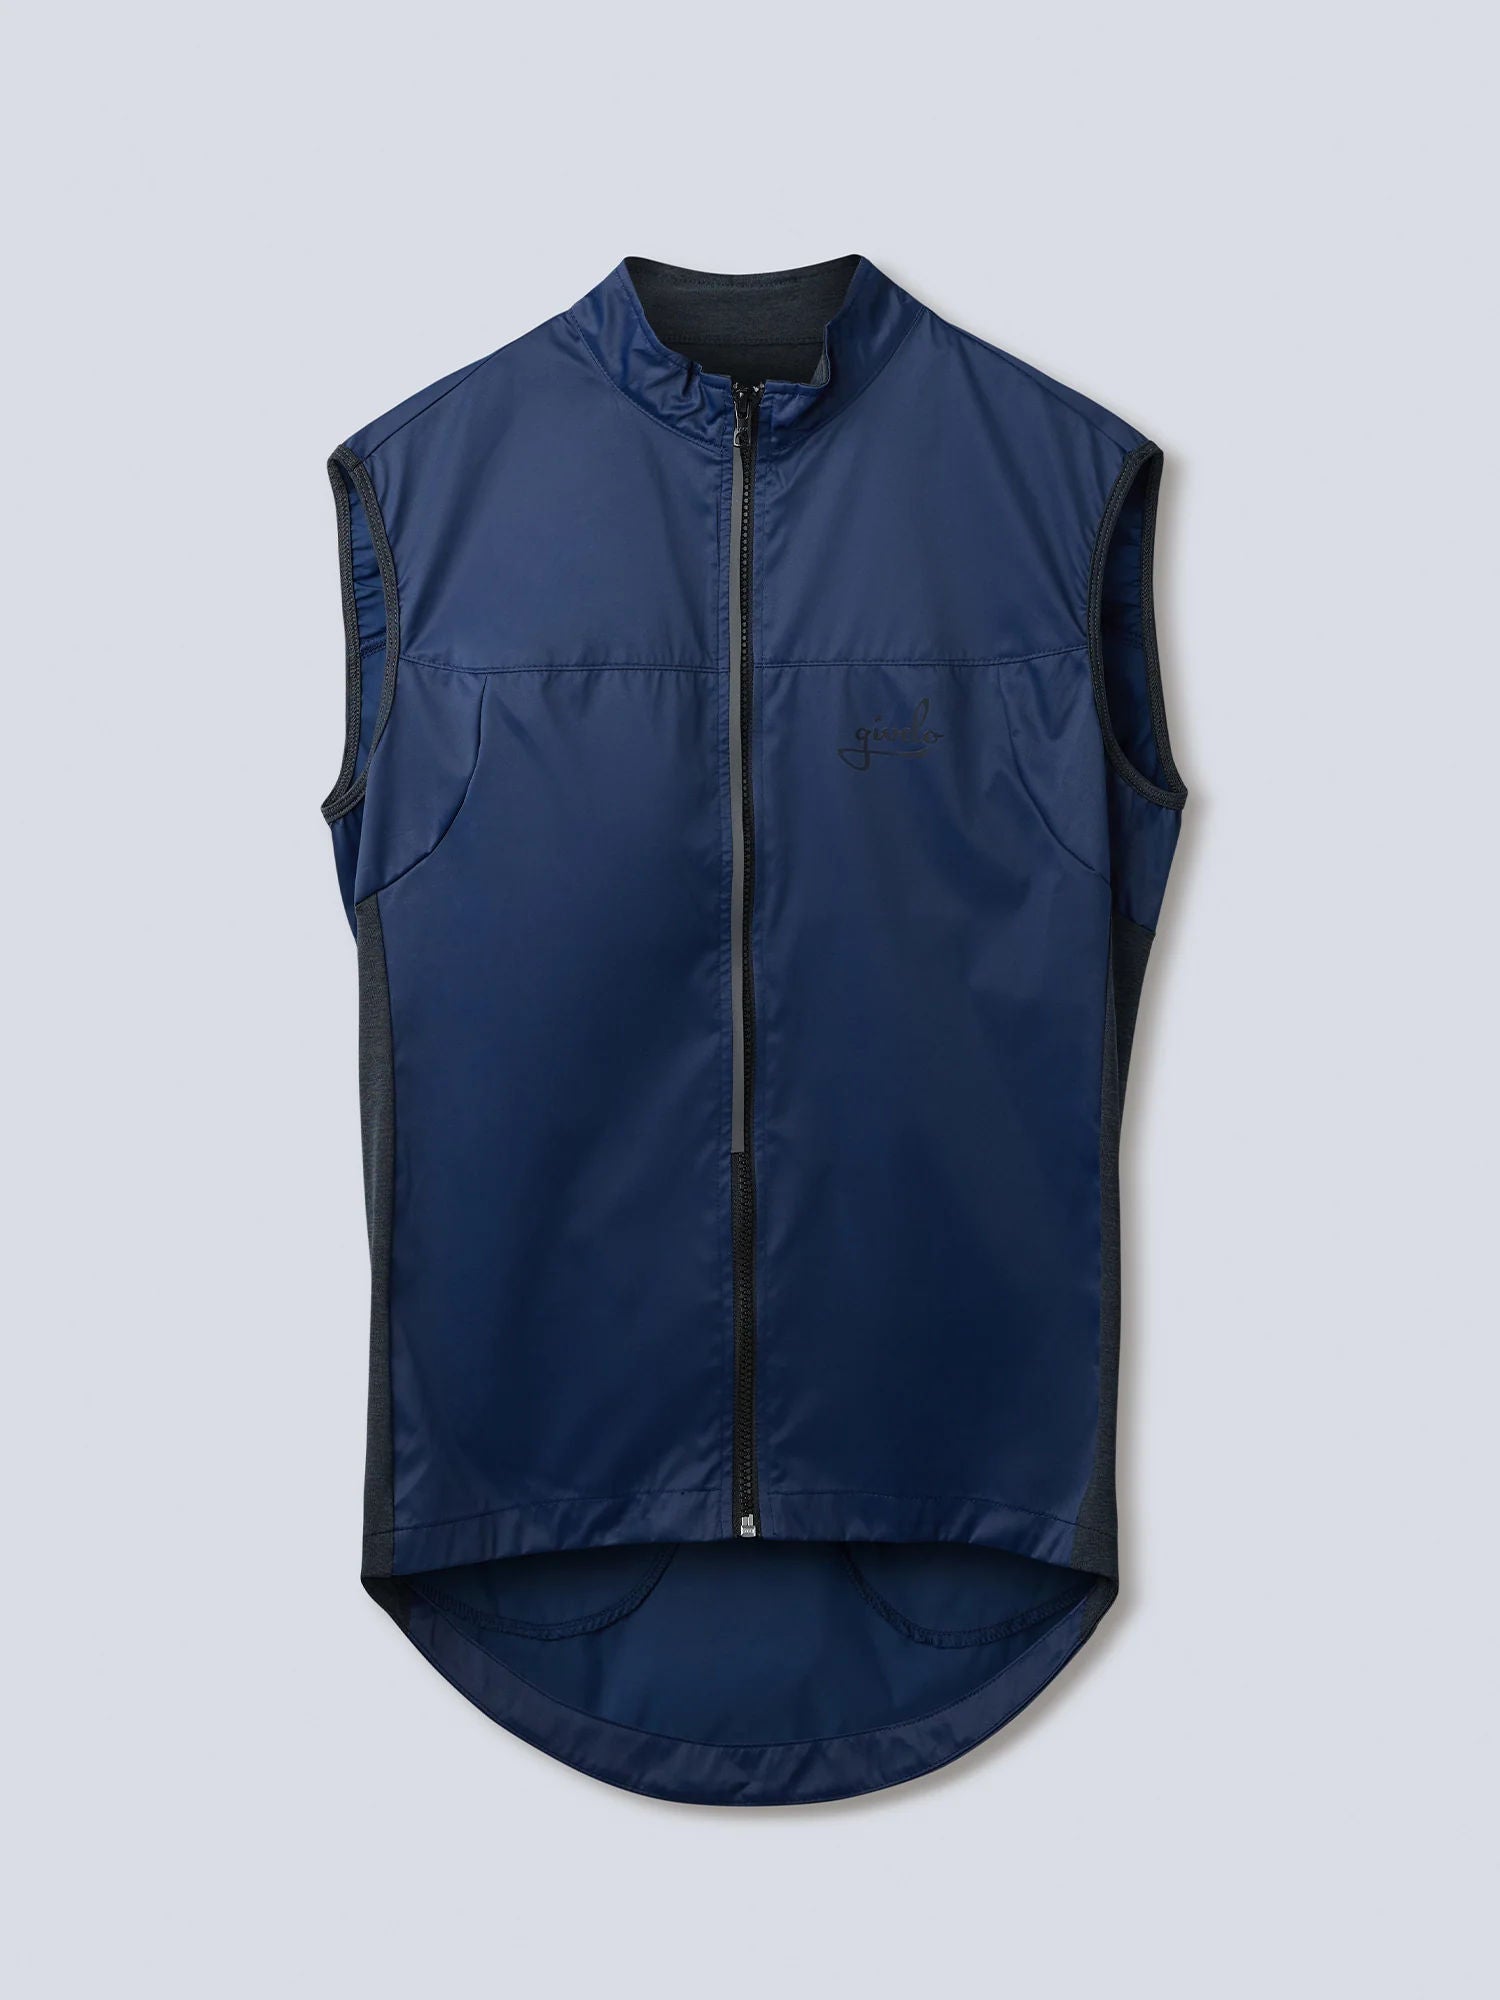 Givelo Quick-Free Gilet Blue レディース サイクルジレ | GEARED